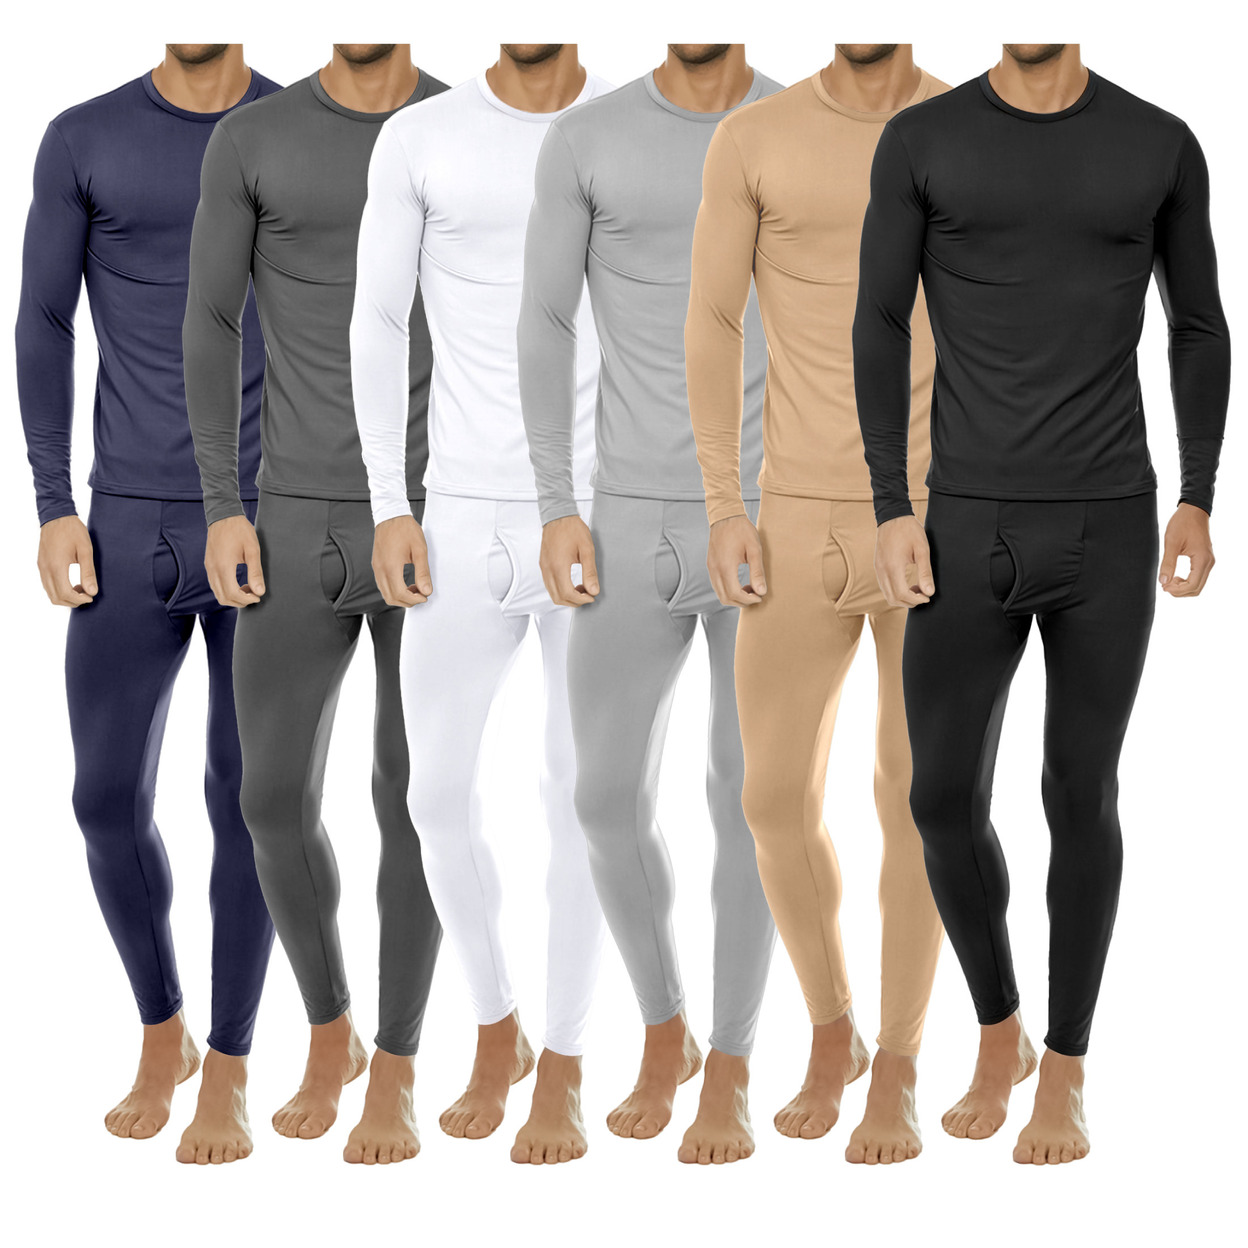 2-Pieces: Men's Winter Warm Fleece Lined Thermal Underwear Set For Cold Weather - Grey, X-large